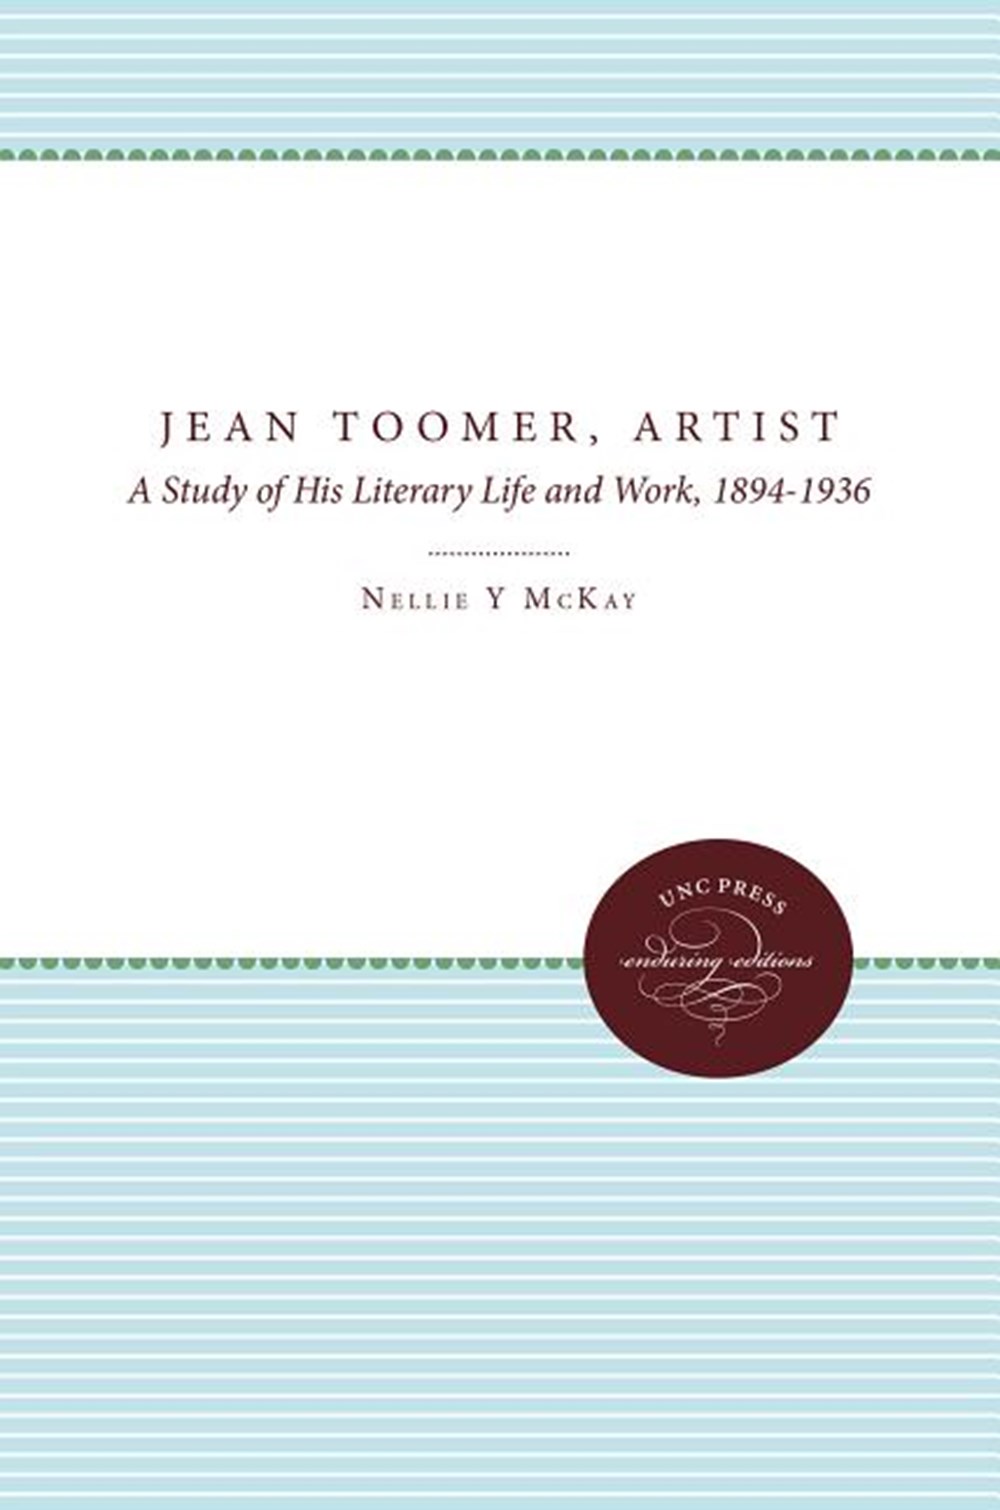 Jean Toomer, Artist: A Study of His Literary Life and Work, 1894-1936 (Revised)